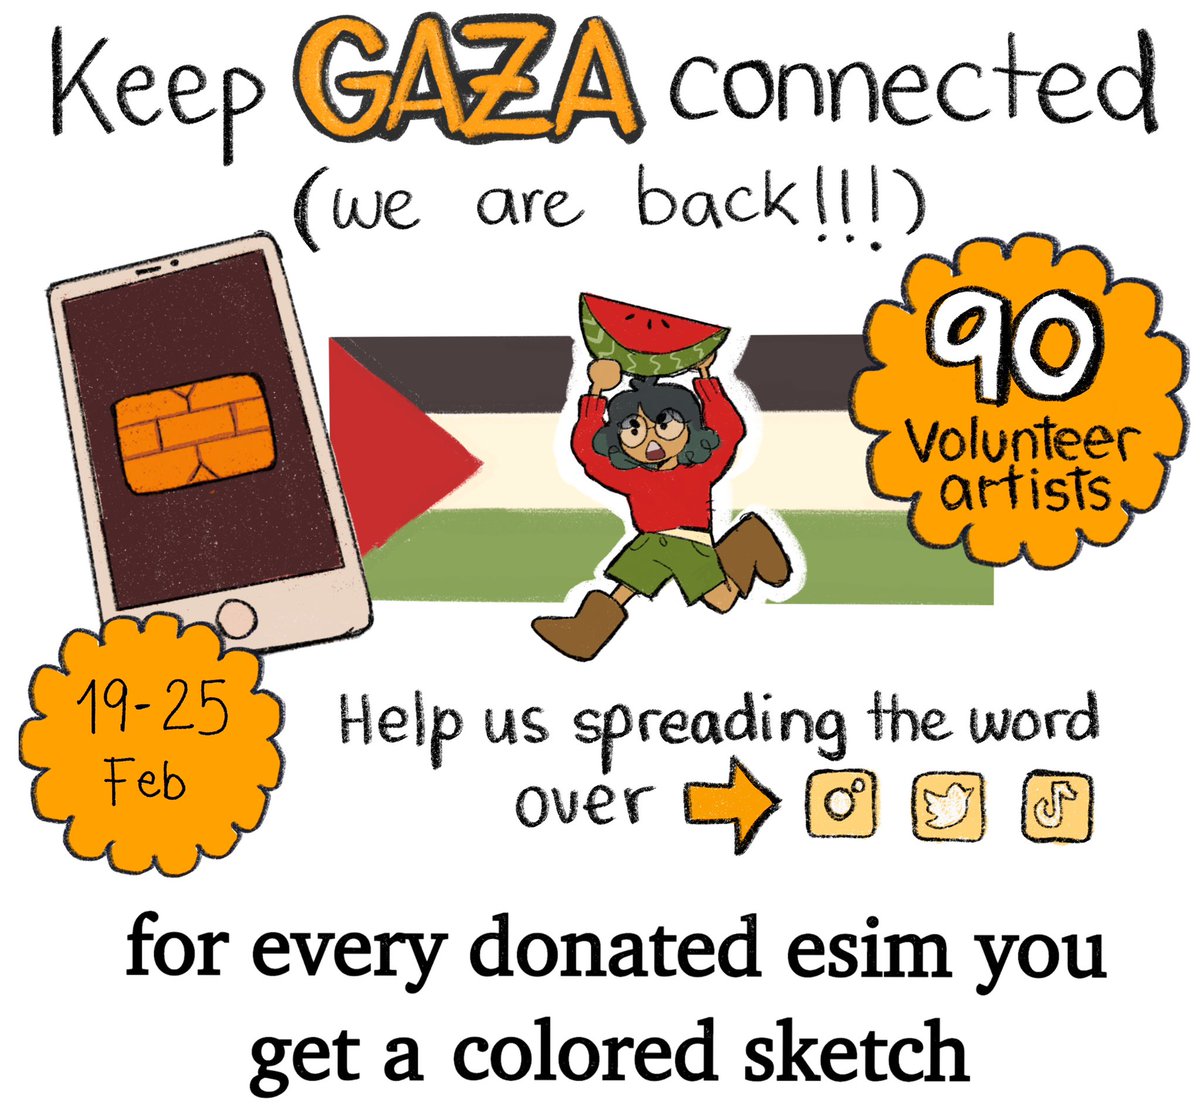 HELP KEEP GAZA CONNECTED!!! we are back with the second strike!! we are now almost a 100 volunteer artists!! in order to get more people to donate, you can get a drawing for every donated esim as long as you send us proof!! tutorial down below!! #CeasefireNOW #FreePalestine